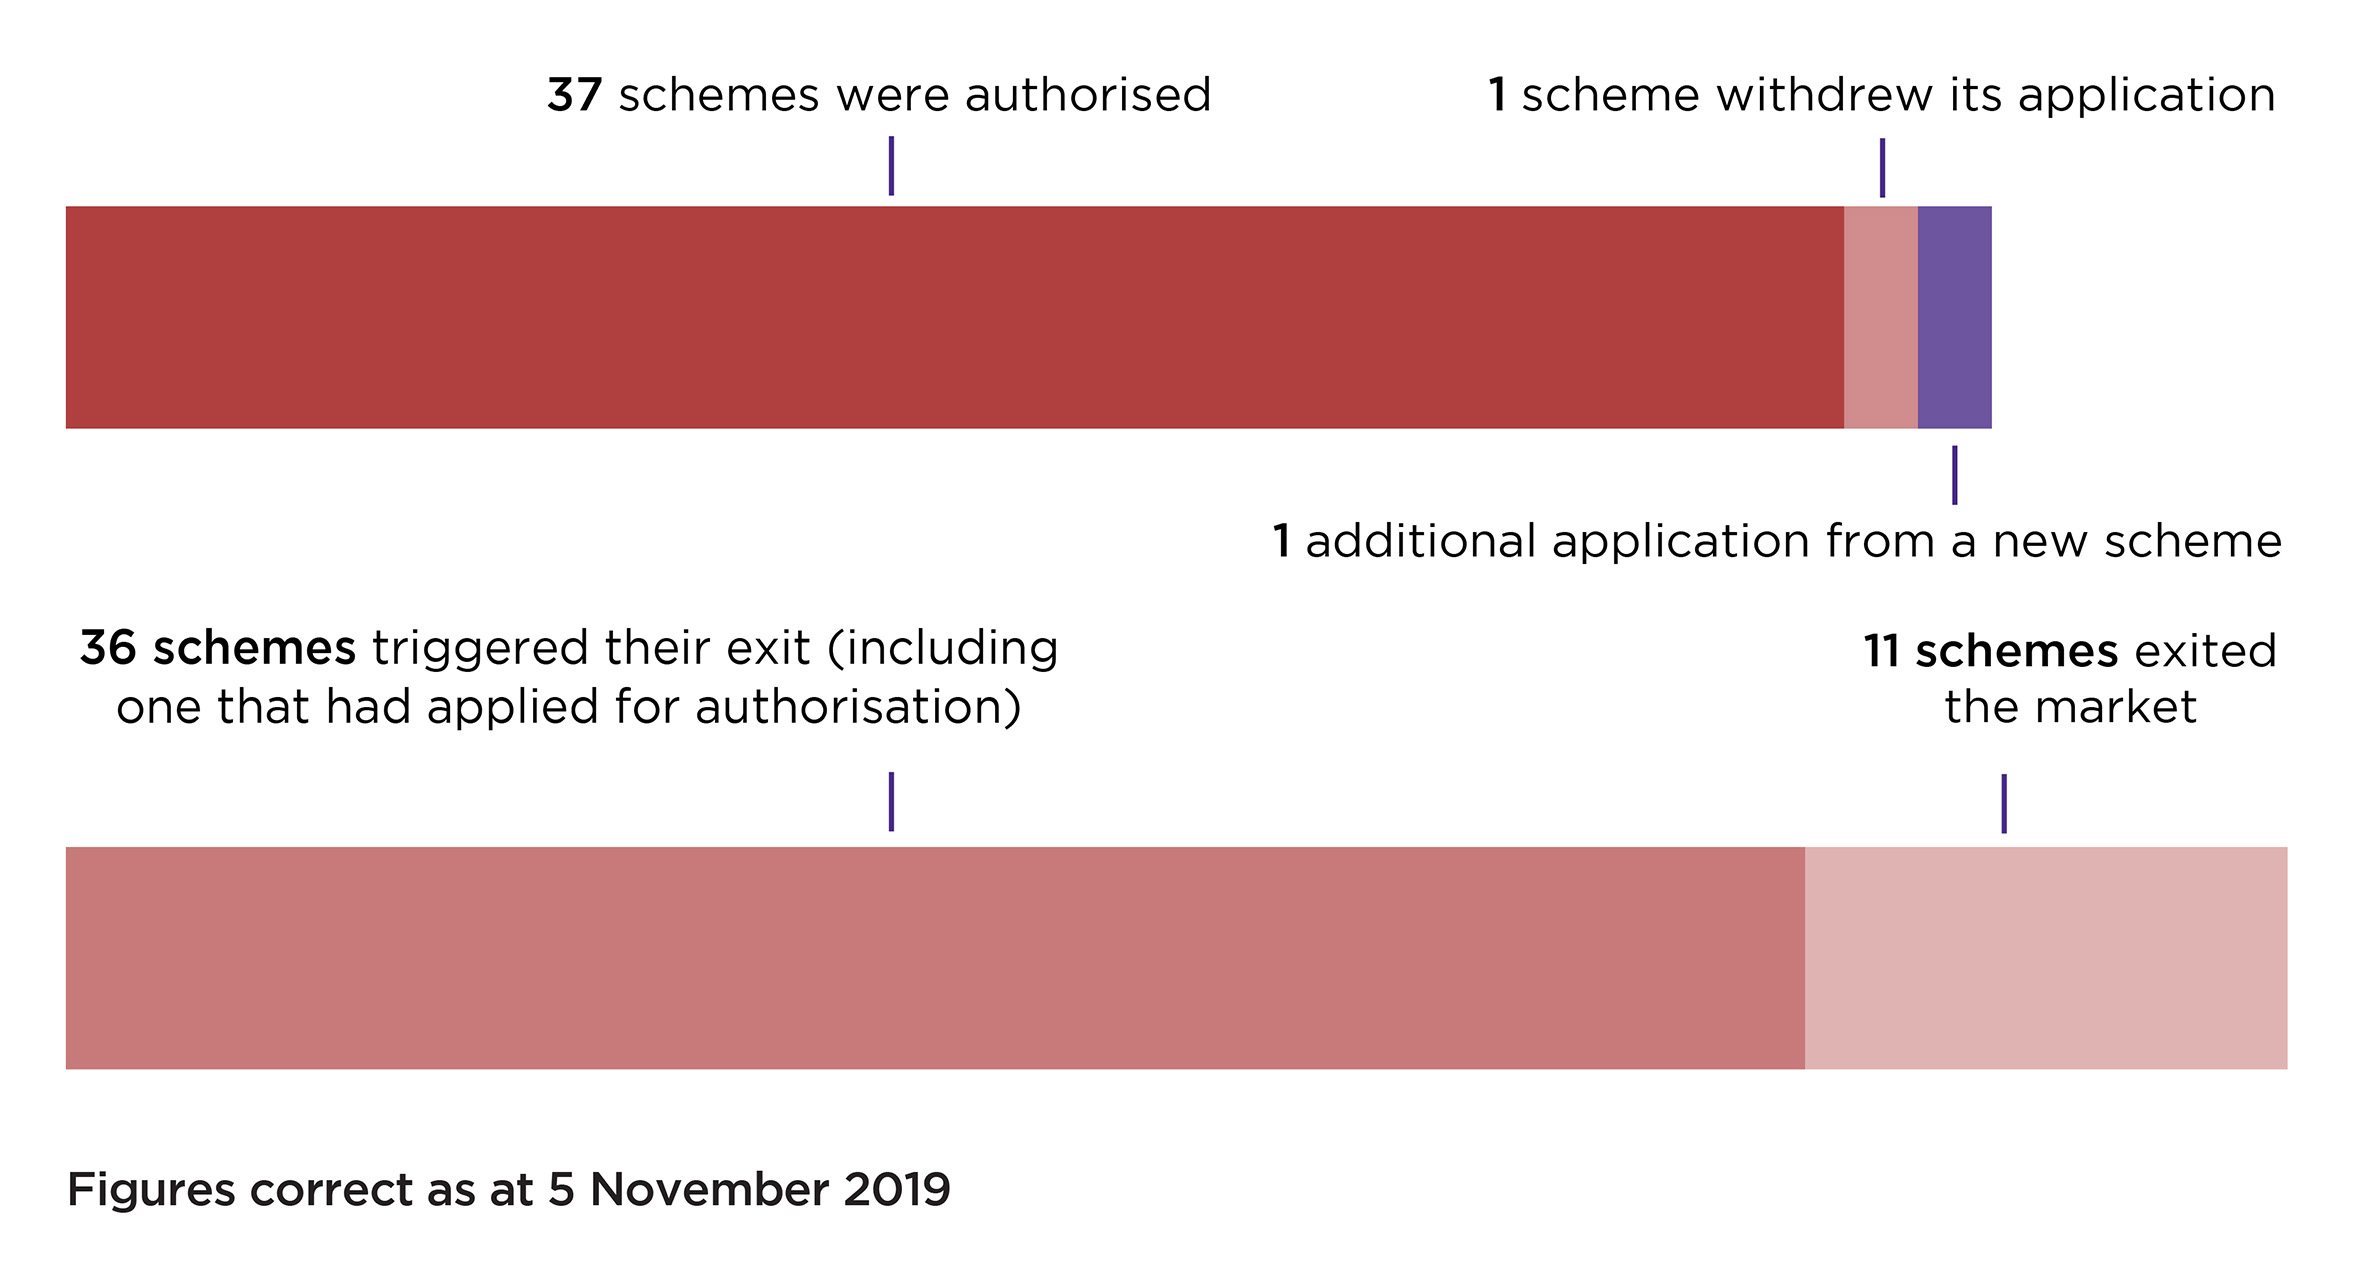 Chart shows: 37 schemes authorised, 1 withdew its application, 1 additional application from a new scheme, 36 triggered their exit (including one that had applied for authorisation), 11 exited the market. Figures correct as at 5 November 2019